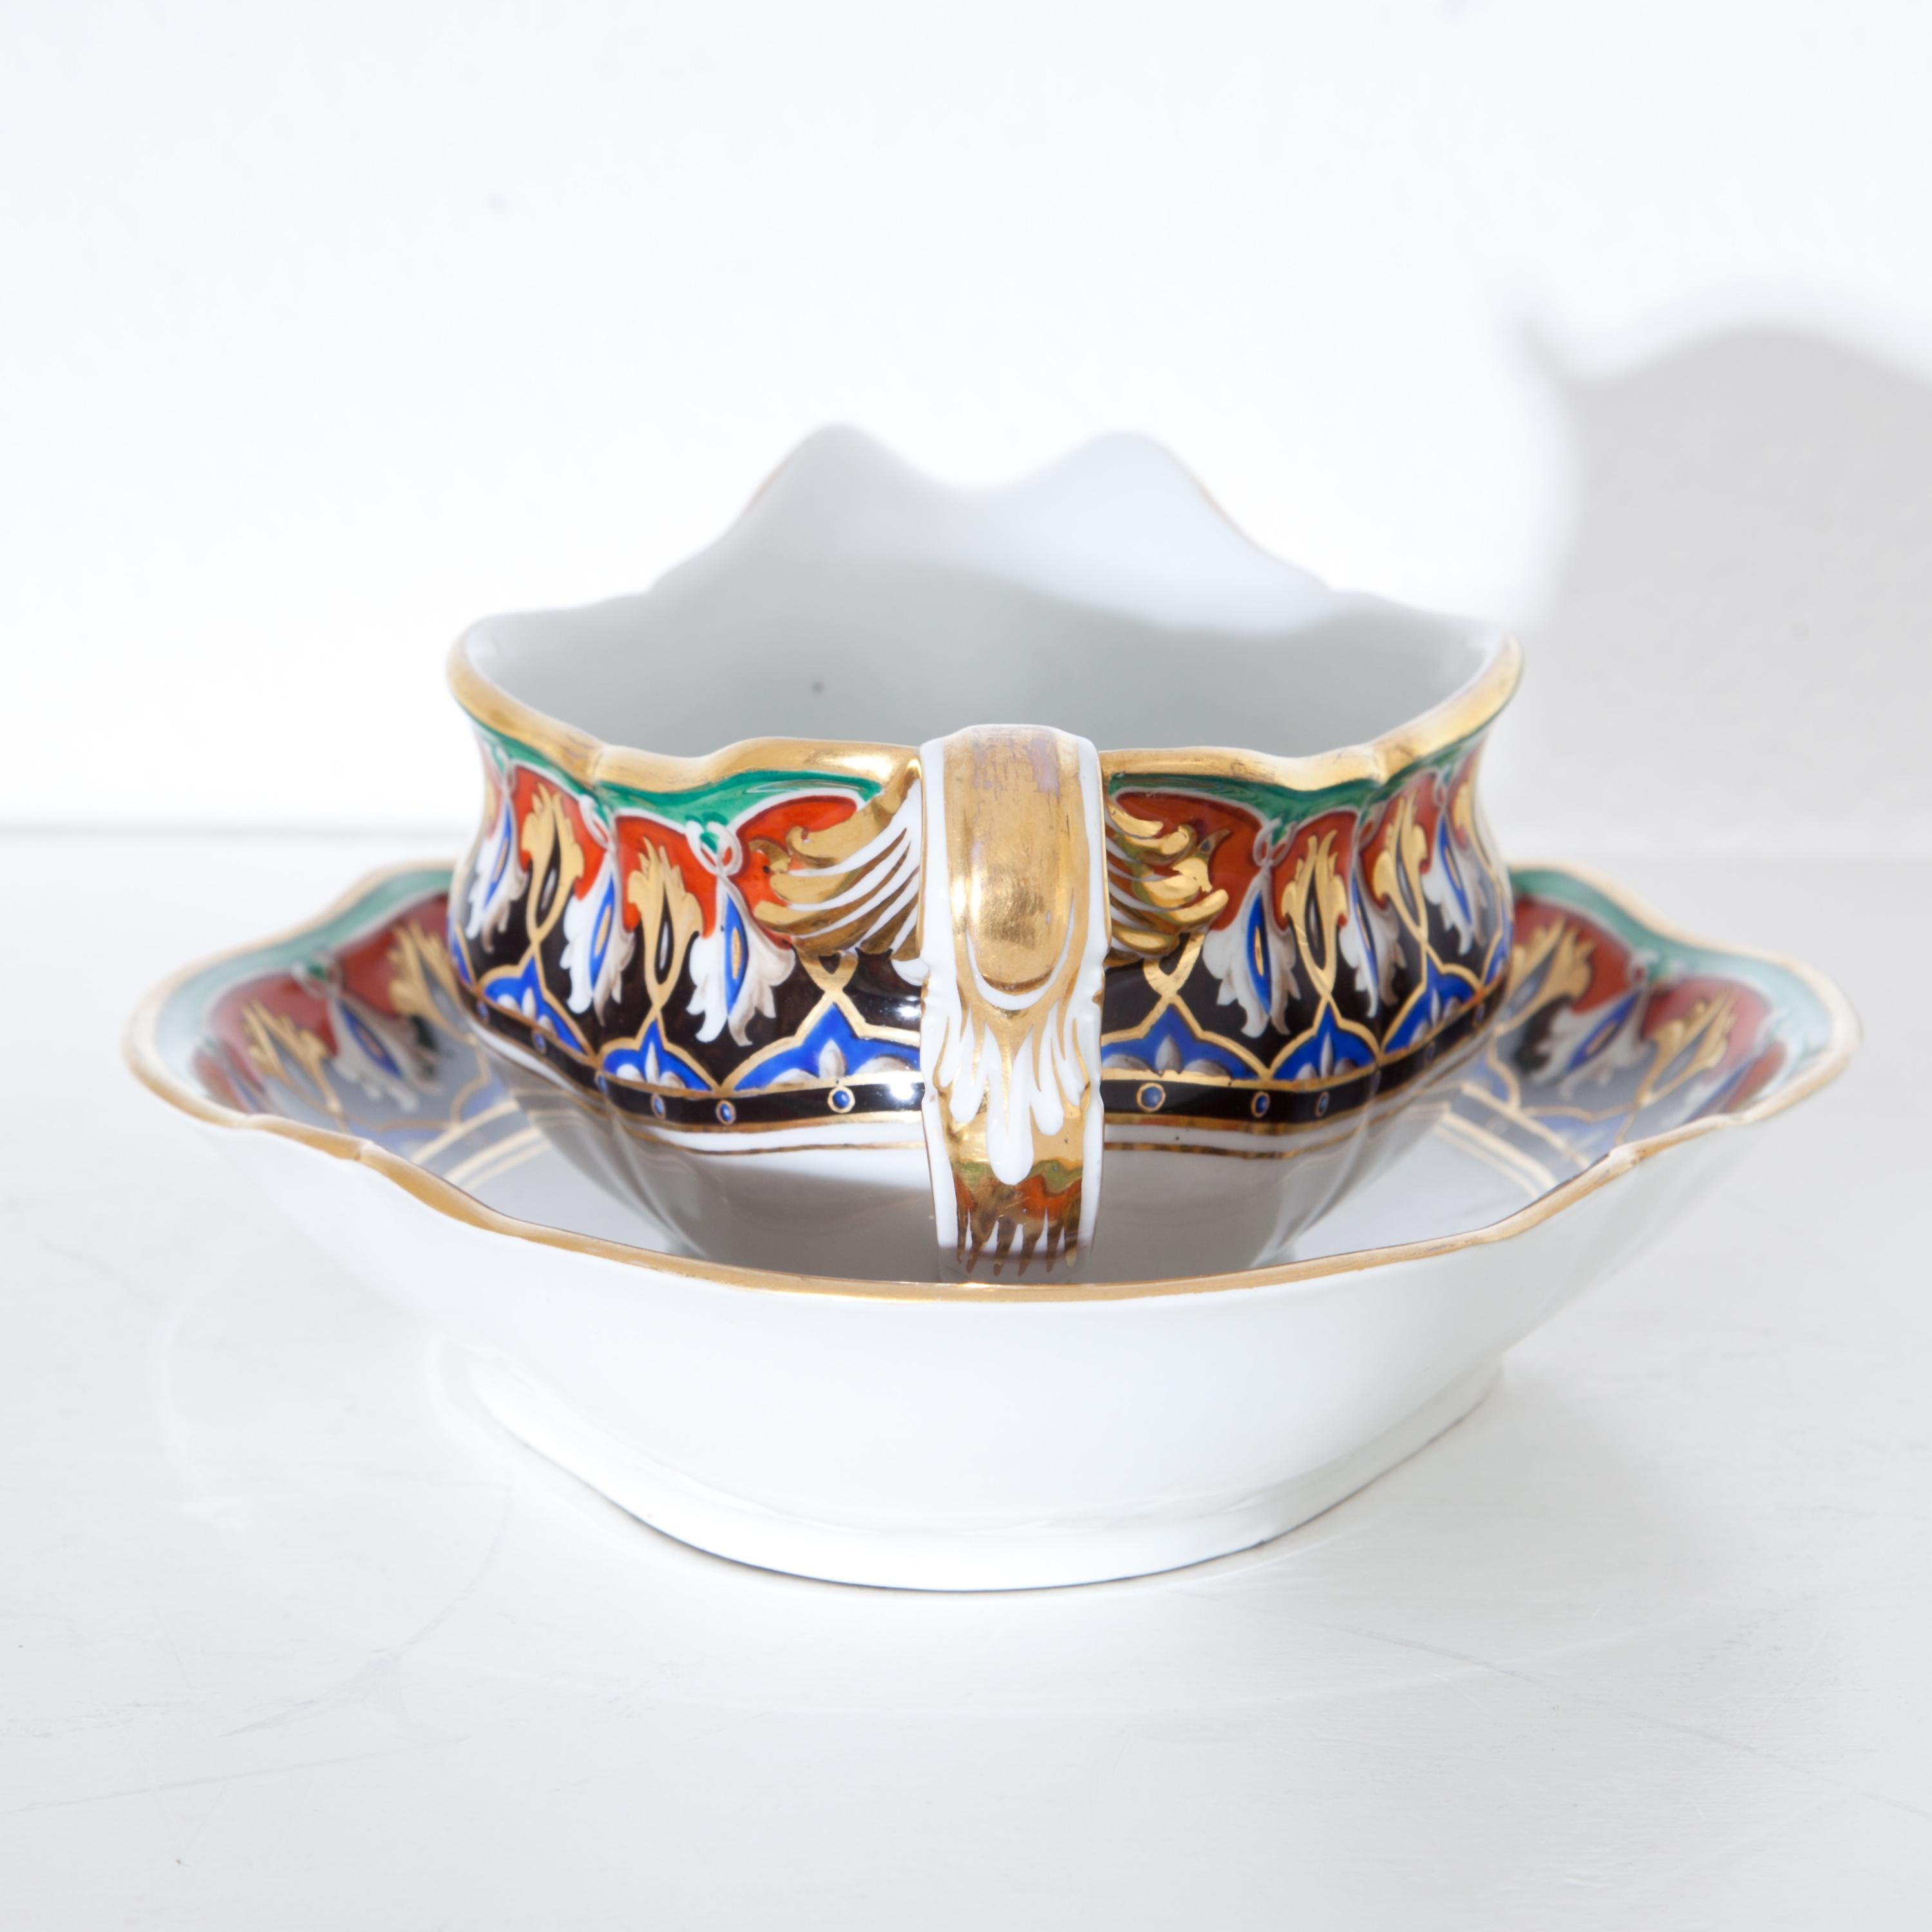 Porcelain Gravy Boat and Spoon with Monogram WA, KPM, Berlin, Germany, 1849-1870 For Sale 4